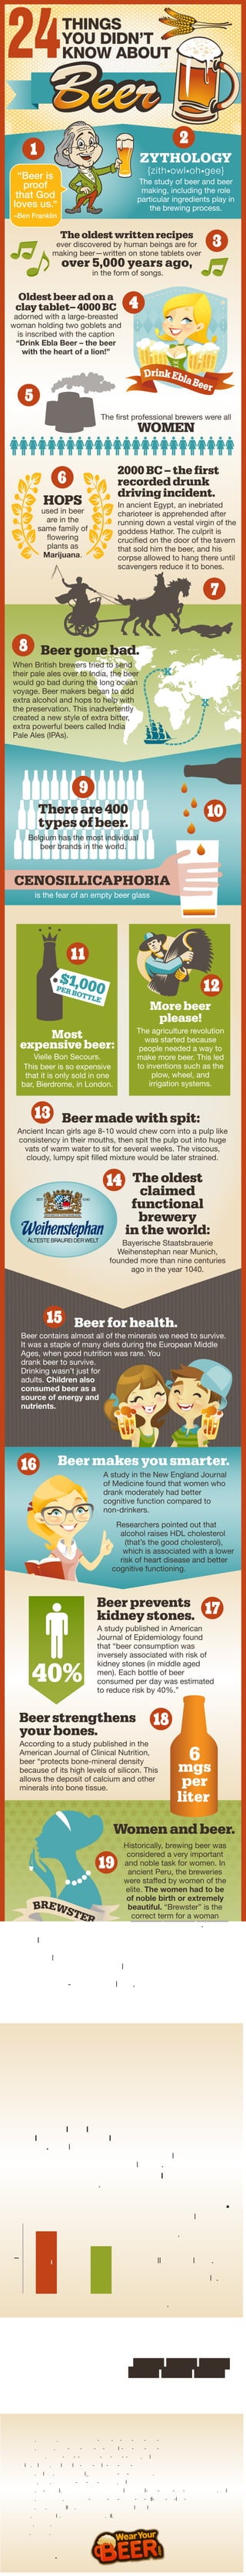 24

THINGS
YOU DIDN’T
KNOW ABOUT

2

1

ZYTHOLOGY
{zith • owl • oh • gee}

“Beer is
proof
that God
loves us.”

The study of beer and beer
making, including the role
particular ingredients play in
the brewing process.

–Ben Franklin

The oldest written recipes

3

ever discovered by human beings are for
making beer—written on stone tablets over

over 5,000 years ago,
in the form of songs.

Oldest beer ad on a
clay tablet— 4000 BC

4

adorned with a large-breasted
woman holding two goblets and
is inscribed with the caption
“Drink Ebla Beer – the beer
with the heart of a lion!”

Drink Ebl

5

a Be

er

The first professional brewers were all

WOMEN

2000 BC – the first
recorded drunk
driving incident.

6
HOPS

In ancient Egypt, an inebriated
charioteer is apprehended after
running down a vestal virgin of the
goddess Hathor. The culprit is
crucified on the door of the tavern
that sold him the beer, and his
corpse allowed to hang there until
scavengers reduce it to bones.

used in beer
are in the
same family of
flowering
plants as
Marijuana.

7
8

Beer gone bad.

When British brewers tried to send
their pale ales over to India, the beer
would go bad during the long ocean
voyage. Beer makers began to add
extra alcohol and hops to help with
the preservation. This inadvertently
created a new style of extra bitter,
extra powerful beers called India
Pale Ales (IPAs).

X
X

9
10

There are 400
types of beer.
Belgium has the most individual
beer brands in the world.

CENOSILLICAPHOBIA
is the fear of an empty beer glass

11
$1,0

PER

B OT

12

00

TLE

More beer
please!
The agriculture revolution
was started because
people needed a way to
make more beer. This led
to inventions such as the
plow, wheel, and
irrigation systems.

Most
expensive beer:
Vielle Bon Secours.
This beer is so expensive
that it is only sold in one
bar, Bierdrome, in London.

13

Beer made with spit:

Ancient Incan girls age 8-10 would chew corn into a pulp like
consistency in their mouths, then spit the pulp out into huge
vats of warm water to sit for several weeks. The viscous,
cloudy, lumpy spit filled mixture would be later strained.

The oldest
claimed
functional
brewery
in the world:

14

Bayerische Staatsbrauerie
Weihenstephan near Munich,
founded more than nine centuries
ago in the year 1040.

15

Beer for health.

Beer contains almost all of the minerals we need to survive.
It was a staple of many diets during the European Middle
Ages, when good nutrition was rare. You
drank beer to survive.
Drinking wasn’t just for
adults. Children also
consumed beer as a
source of energy and
nutrients.

Beer makes you smarter.

16

A study in the New England Journal
of Medicine found that women who
drank moderately had better
cognitive function compared to
non-drinkers.
Researchers pointed out that
alcohol raises HDL cholesterol
(that’s the good cholesterol),
which is associated with a lower
risk of heart disease and better
cognitive functioning.

Beer prevents
kidney stones.

17

A study published in American
Journal of Epidemiology found
that “beer consumption was
inversely associated with risk of
kidney stones (in middle aged
men). Each bottle of beer
consumed per day was estimated
to reduce risk by 40%.”

40%

18

Beer strengthens
your bones.

According to a study published in the
American Journal of Clinical Nutrition,
beer “protects bone-mineral density
because of its high levels of silicon. This
allows the deposit of calcium and other
minerals into bone tissue.

6

mgs
per
liter

Women and beer.

19
BREWS

21

TE

R

Historically, brewing beer was
considered a very important
and noble task for women. In
ancient Peru, the breweries
were staffed by women of the
elite. The women had to be
of noble birth or extremely
beautiful. “Brewster” is the
correct term for a woman
who brews beer.

In the 19th century, nursing
mothers in Munich, Germany
would drink up to 7 pints of
beer a day under the belief
that this was required in order
to breast-feed their children.

22

20
In ancient Egypt
there was a written
law that prevented
men from selling
and making beer.

DRINK

BEER

EVERY

Don’t forget!
Drink your daily
ration of beer!

DAY

One of the oldest laws in the
world to be passed is related
to beer. Babylonian King Hummurabi
decreed that each person was to have a daily ration
of beer, determined by their social status.
He then went onto say that women would be drowned if
they served bad beer.

Hectoliters

23
Czech
Republic

China

USA

Per Capita

6 pack to go

Thirsty China.
The Czech Republic drinks
more beer per capita than any
other country. For the past
two years, China drinks more
beer than any other country
(350 million hectoliters).
China is the fastest growing
beer market in the world. The
United States ranks number
two by amount, but ranks 11
per capita.

24

The first beer cans were
produced in 1935. Drinkers
were no longer going to
taverns, and breweries
needed to get beer into the
homes. The smaller packages
made it much easier to get
beer home.

BEER BEER BEER
BEER BEER BEER

Sources:
http://www.mandatory.com/2012/02/28/15-things-you-didnt-know-about-beer/8
http://www.beertruth.com/5-weird-things-you-probably-dont-know-about-beer/
http://weirdfacts.com/fun-facts-a-stuff/3271-beer-facts-a-quotes.html
http://life.dailyburn.com/lifestyle/5-weird-health-facts-about-beer/
http://www.health24.com/Man/Social_addictions/748-767-3072,58320.asp
http://voices.yahoo.com/strange-beer-facts-2462296.html
http://www.sun-sentinel.com/entertainment/restaurants/libations/sfl-mark-cheers-beer-facts,0,2993075.htmlpage
http://www.fermentarium.com/random-news/15-beer-factoids-that-will-make-you-look-smart/
http://www.nejm.org/doi/full/10.1056/NEJMoa041152#t=articleResults
http://aje.oxfordjournals.org/content/150/2/187.full.pdf
http://ajcn.nutrition.org/content/89/4/1188
http://en.wikipedia.org/wiki/Munich

Brought to you by:
WearYourBeer.com

 